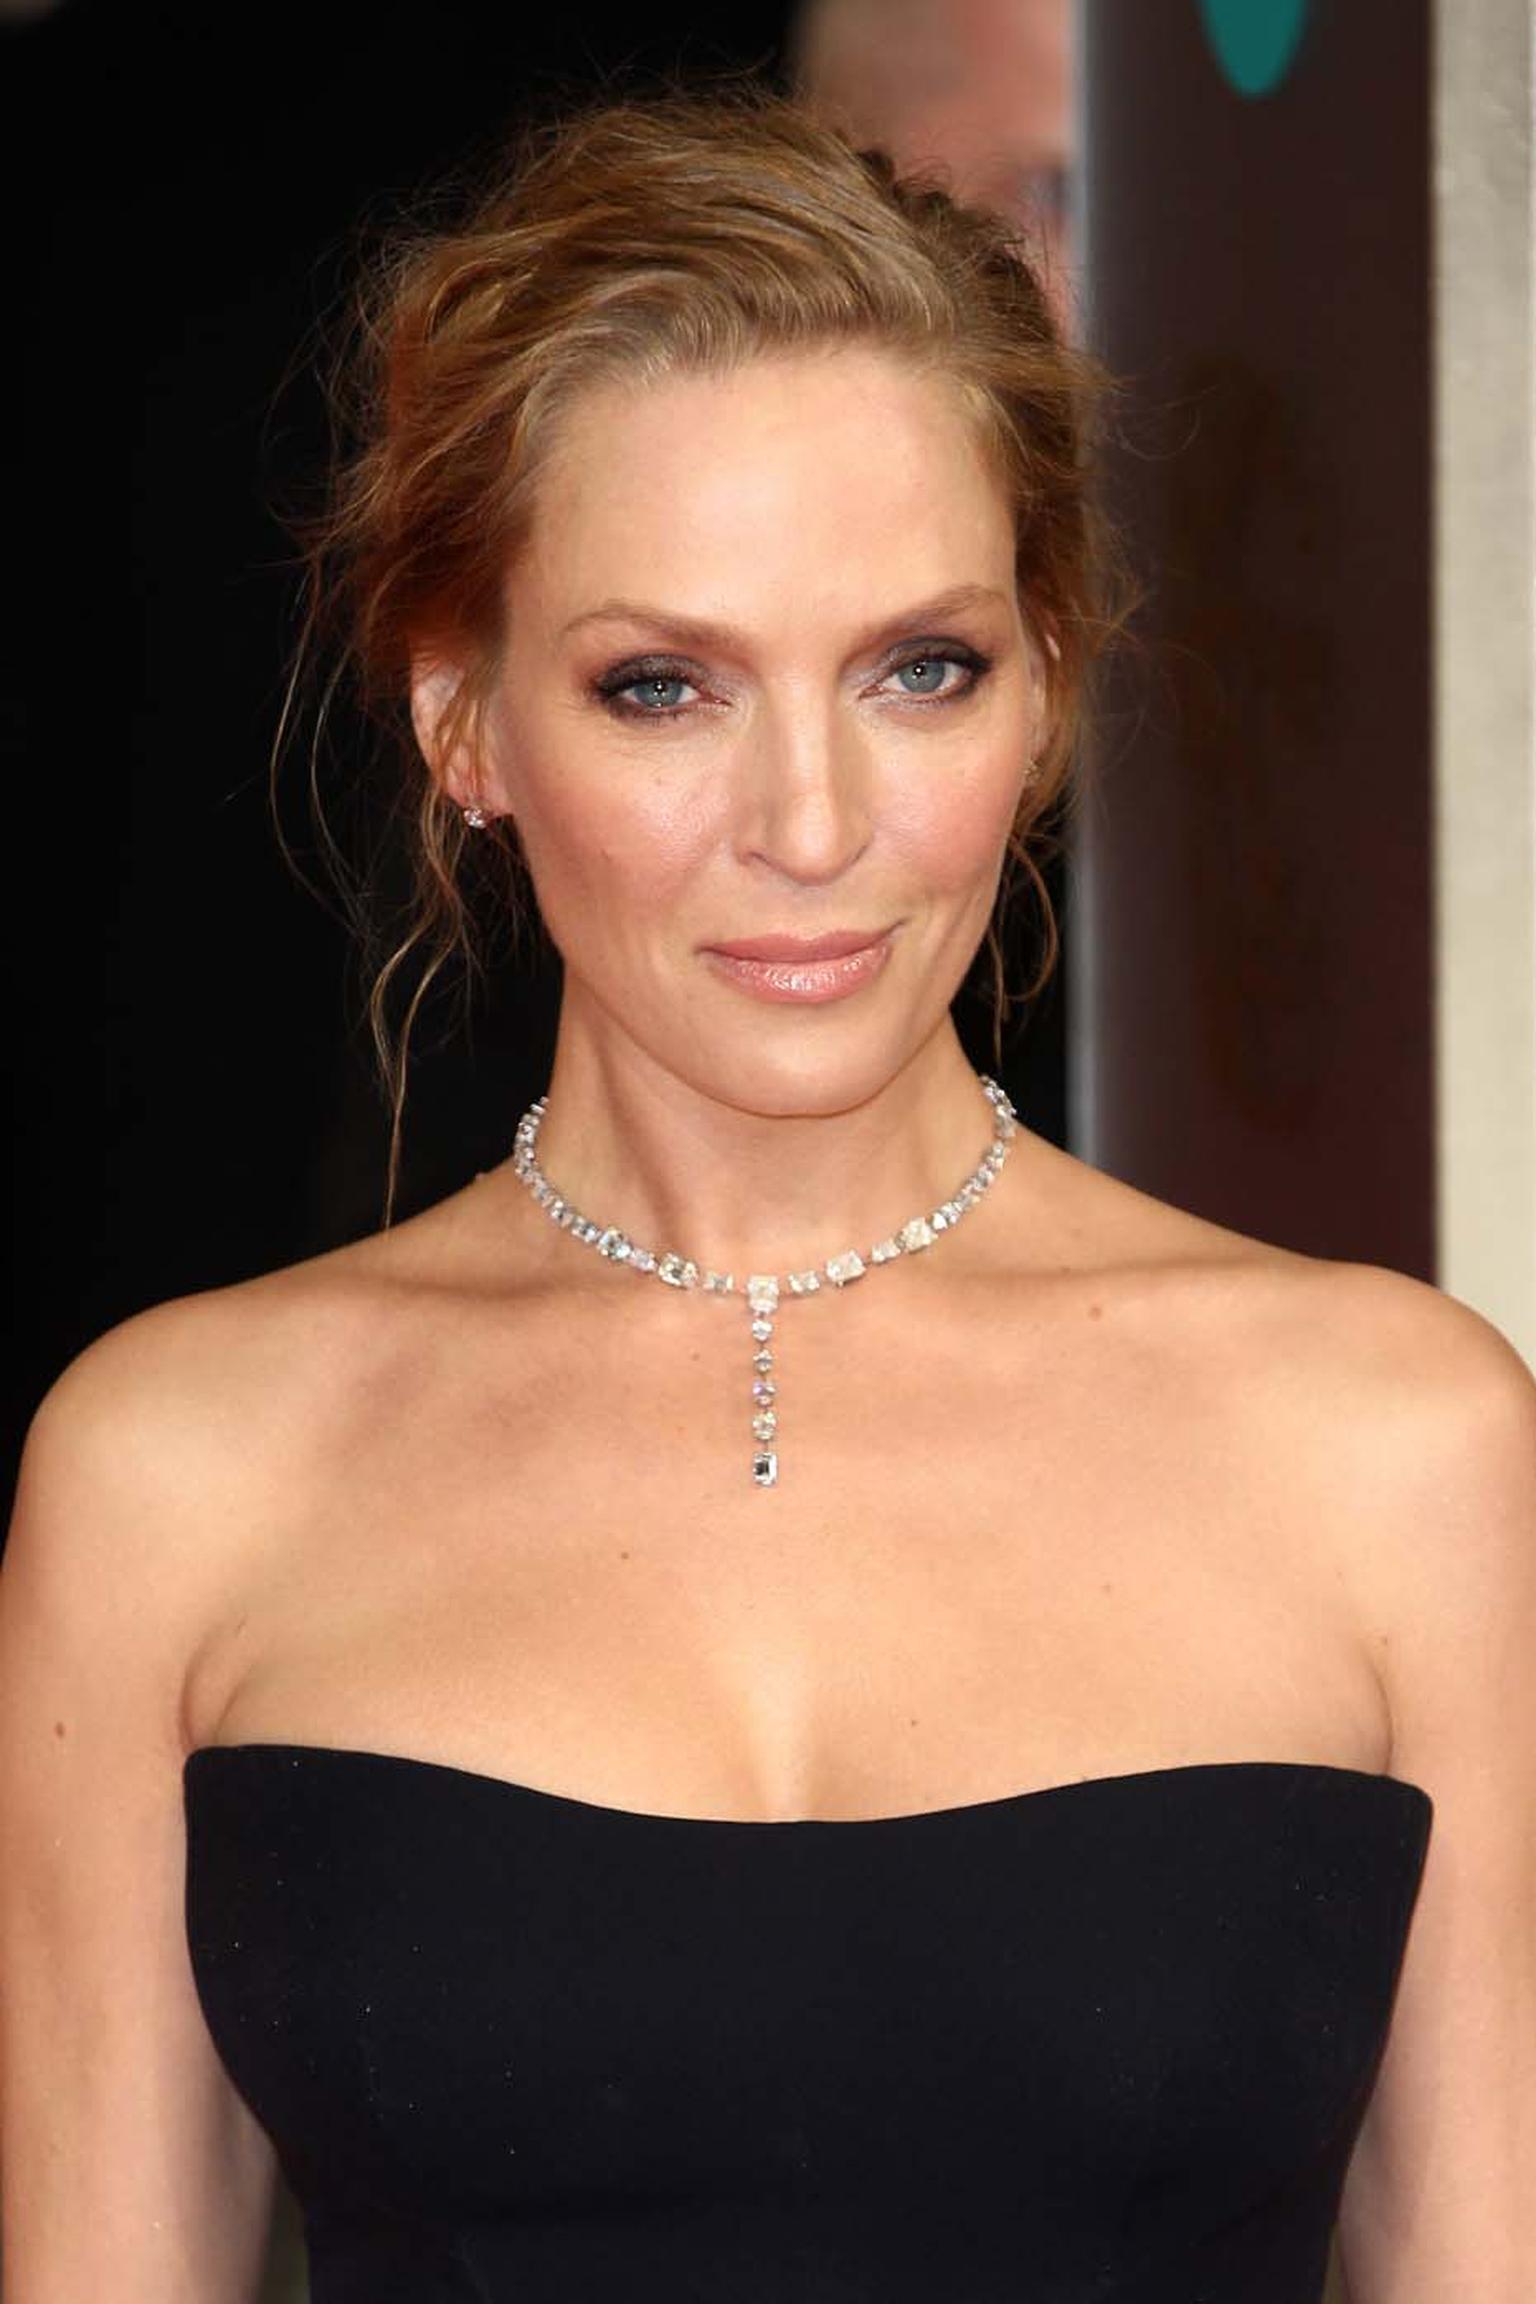 BAFTAs 2014 presenter Uma Thurman wore a necklace by Chopard featuring 32ct of diamonds, diamond stud earrings, a heart-shaped diamond bracelet and a ring from the Chopard Temptations collection